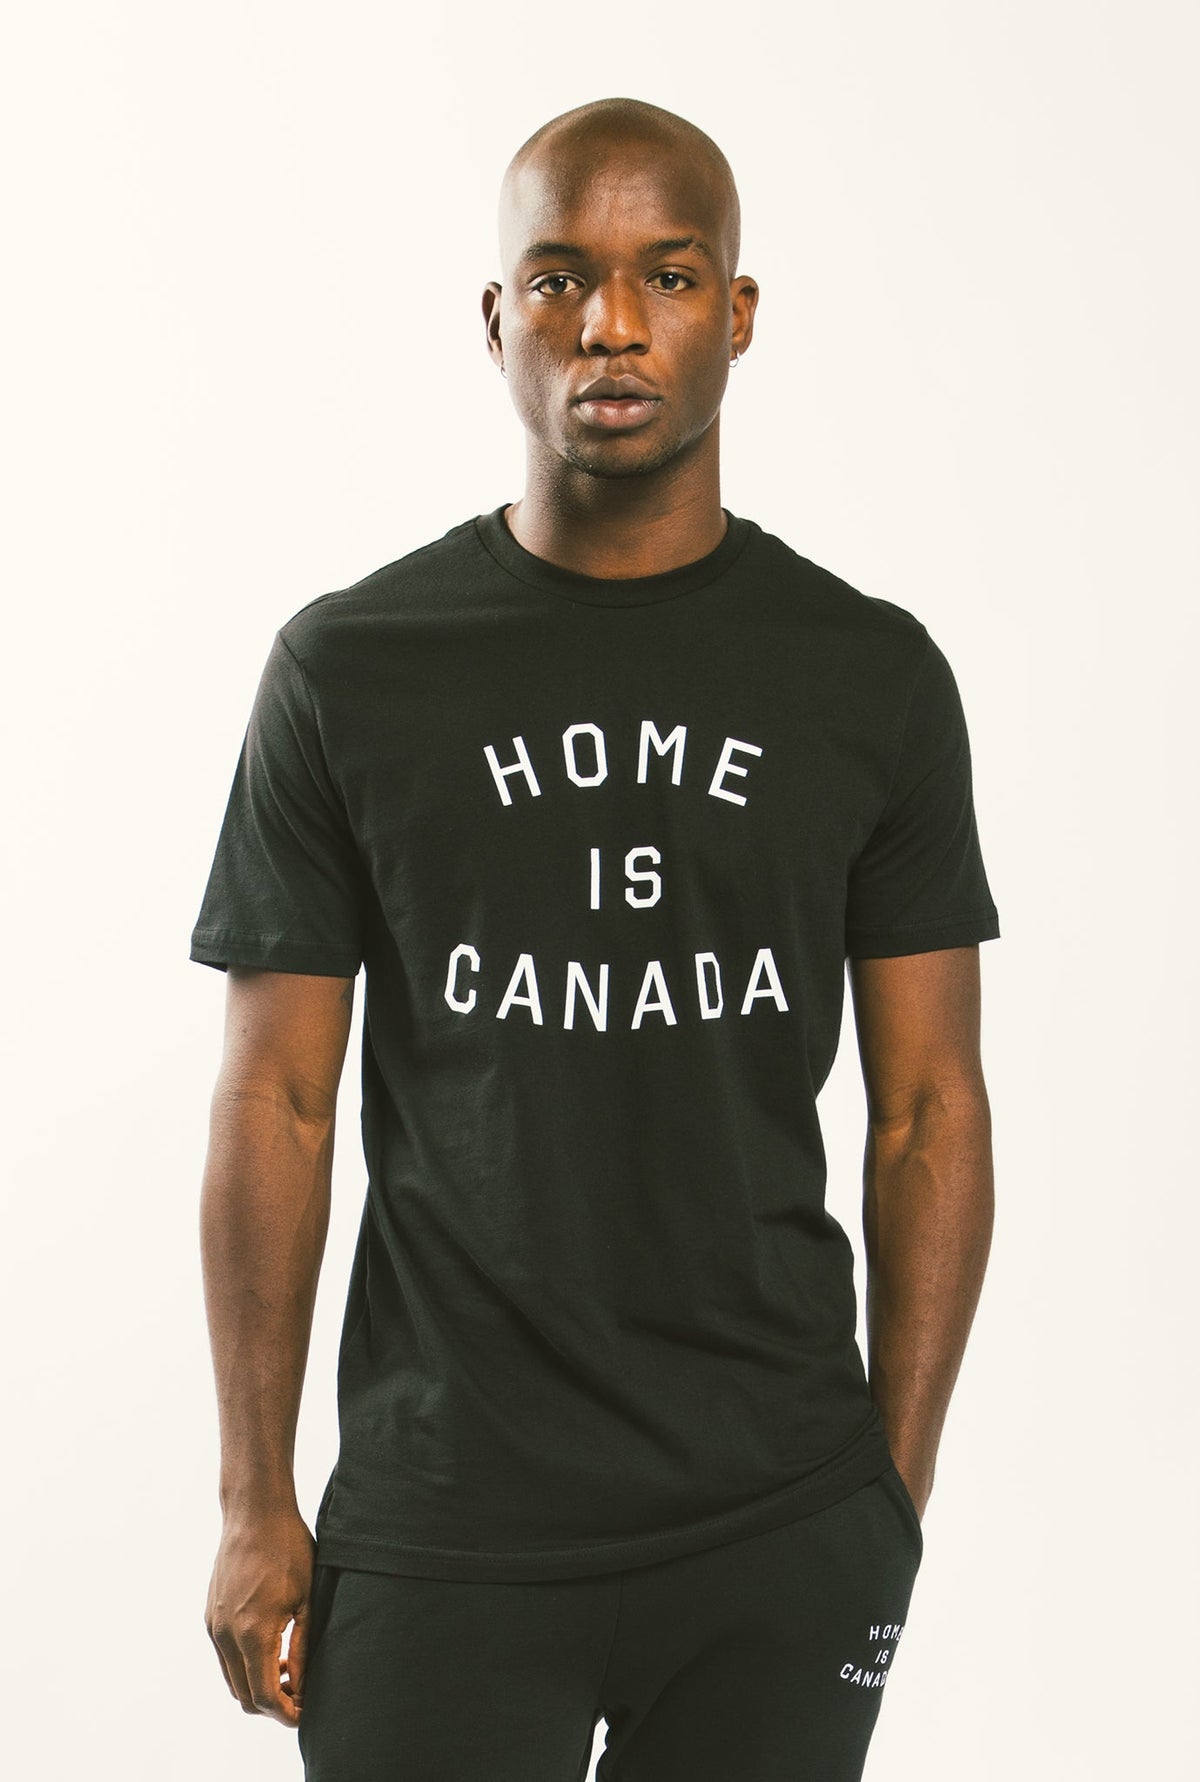 Home is Canada T-Shirt - Black